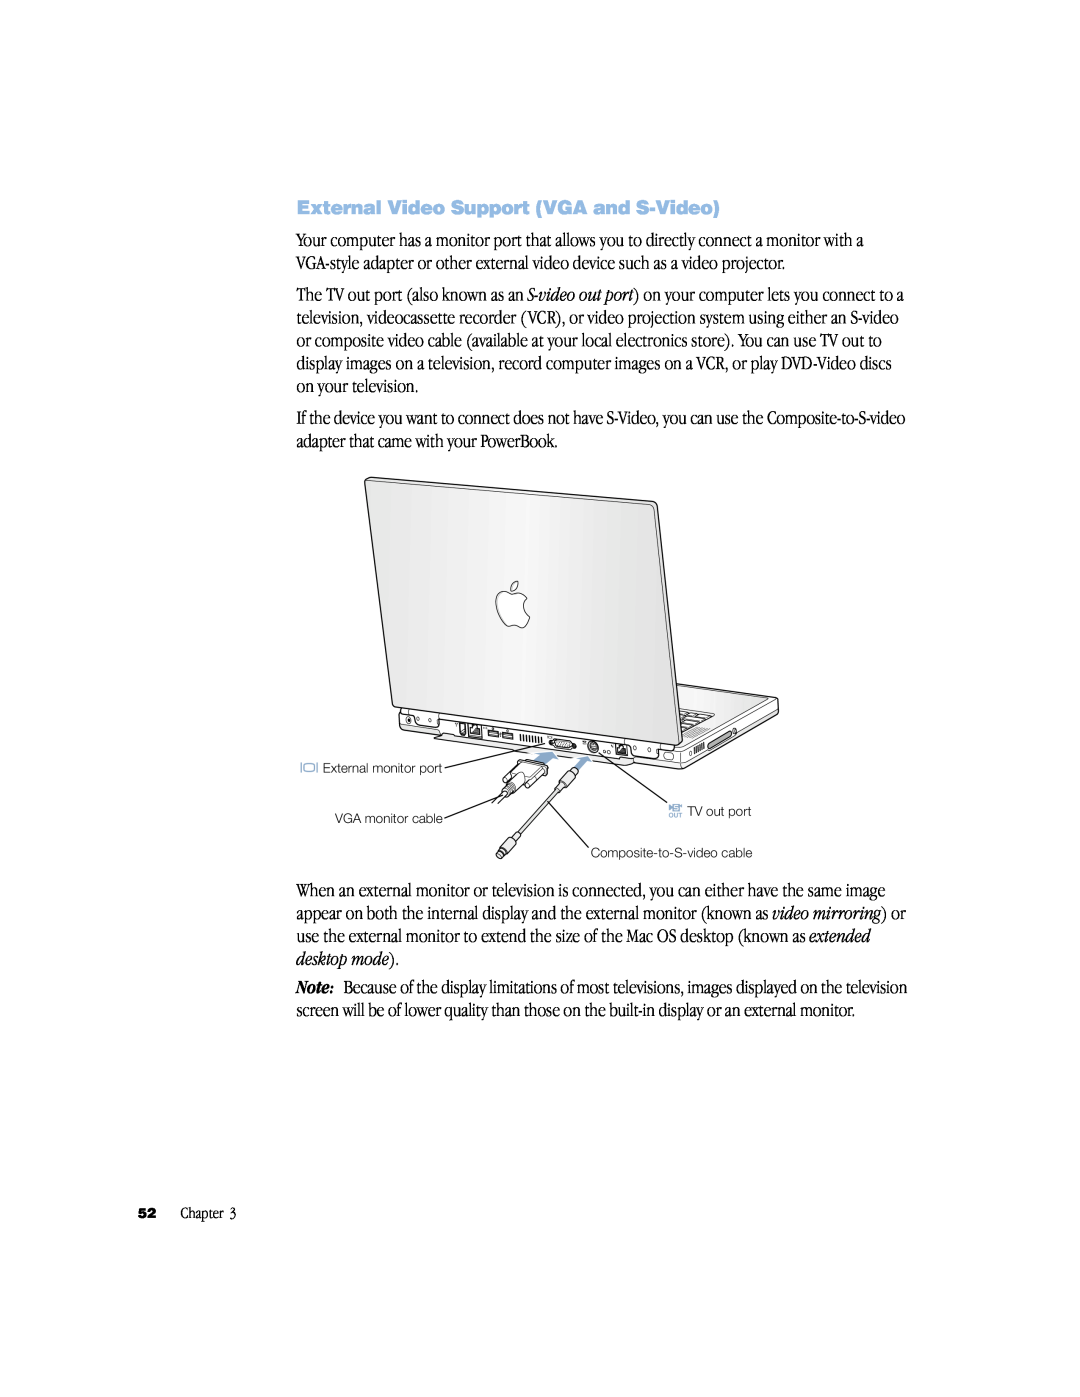 Apple powerbook g4 manual External Video Support VGA and S-Video, Chapter 